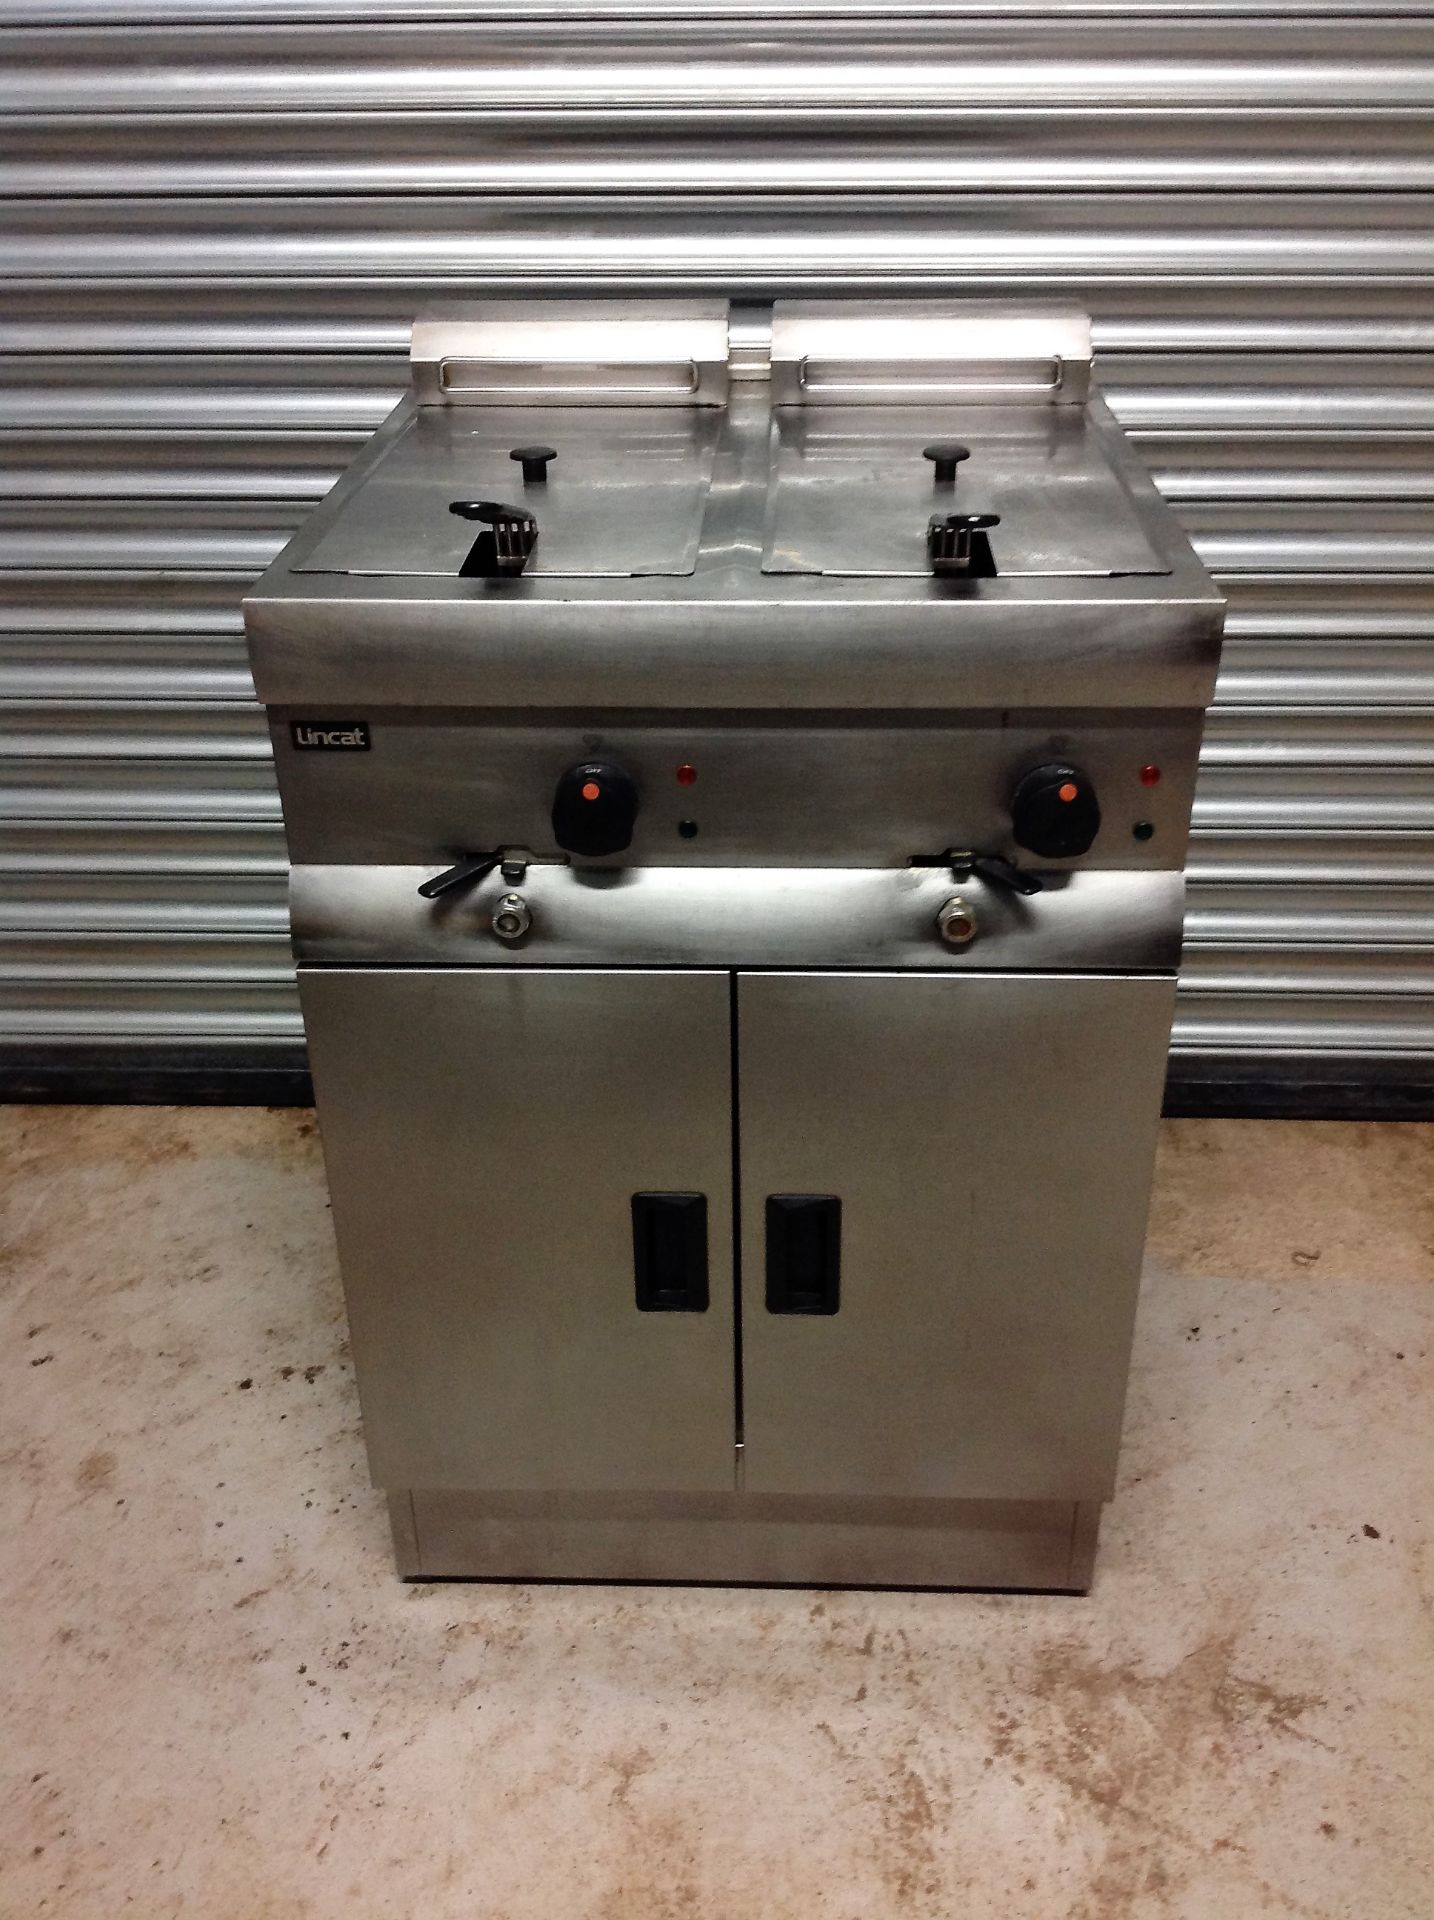 Lincat Stainless Steel Double Deep Fat Fryer With Under Cupboard And Oil Bucket/Nozzle - Image 2 of 6